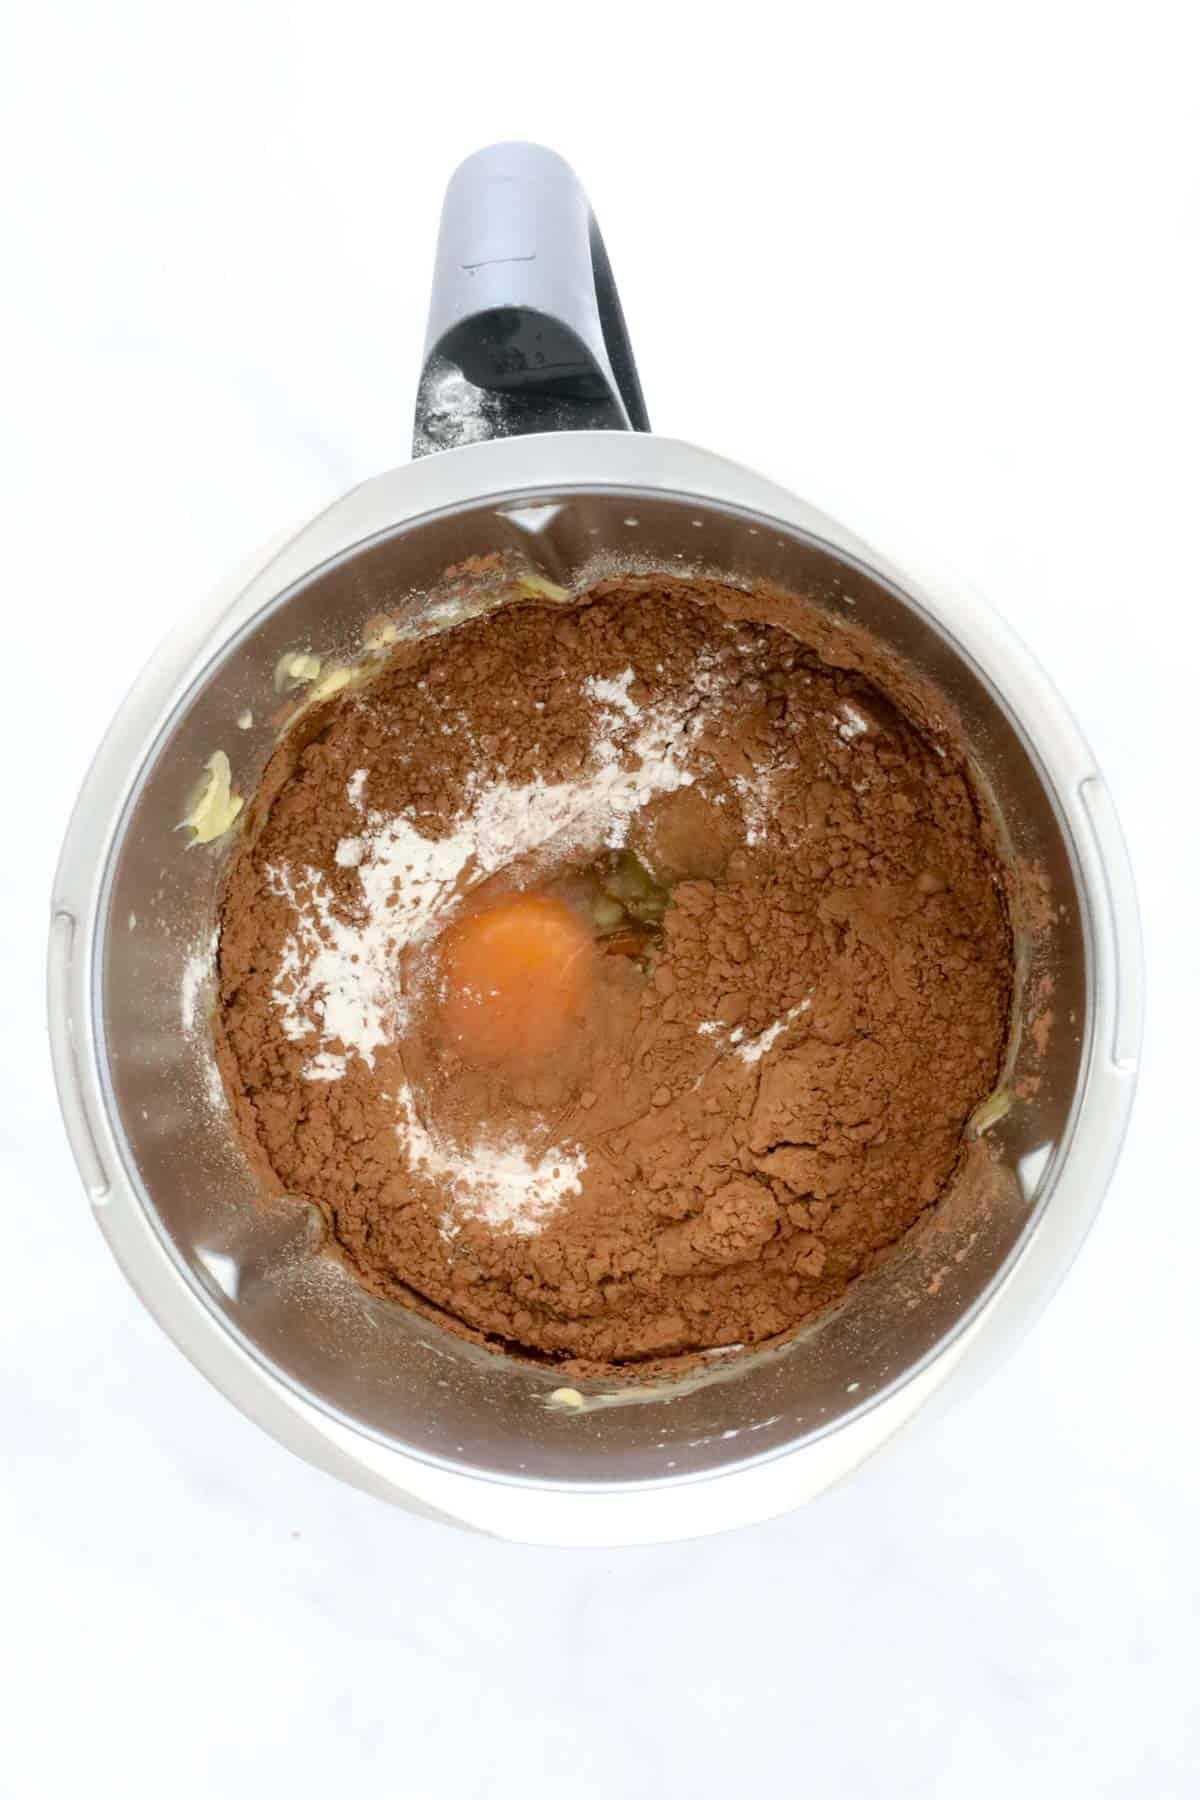 Eggs and cocoa in a bowl.